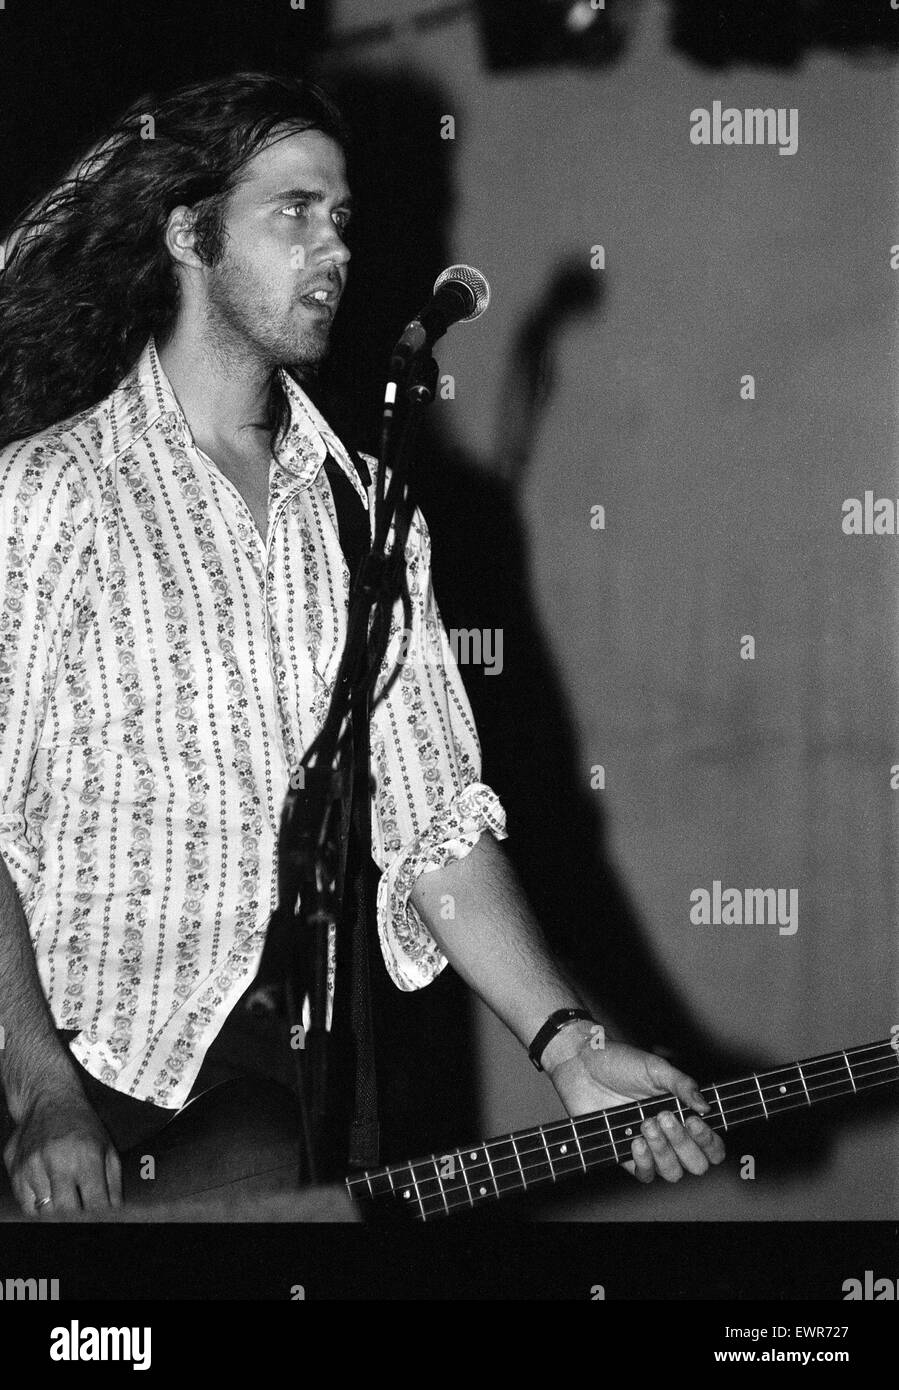 Krist Novoselic, bass guitarist of Seattle-based grunge rock group Nirvana,  on stage during the group's headlining performance at the Reading Festival. 30th August 1992. Stock Photo